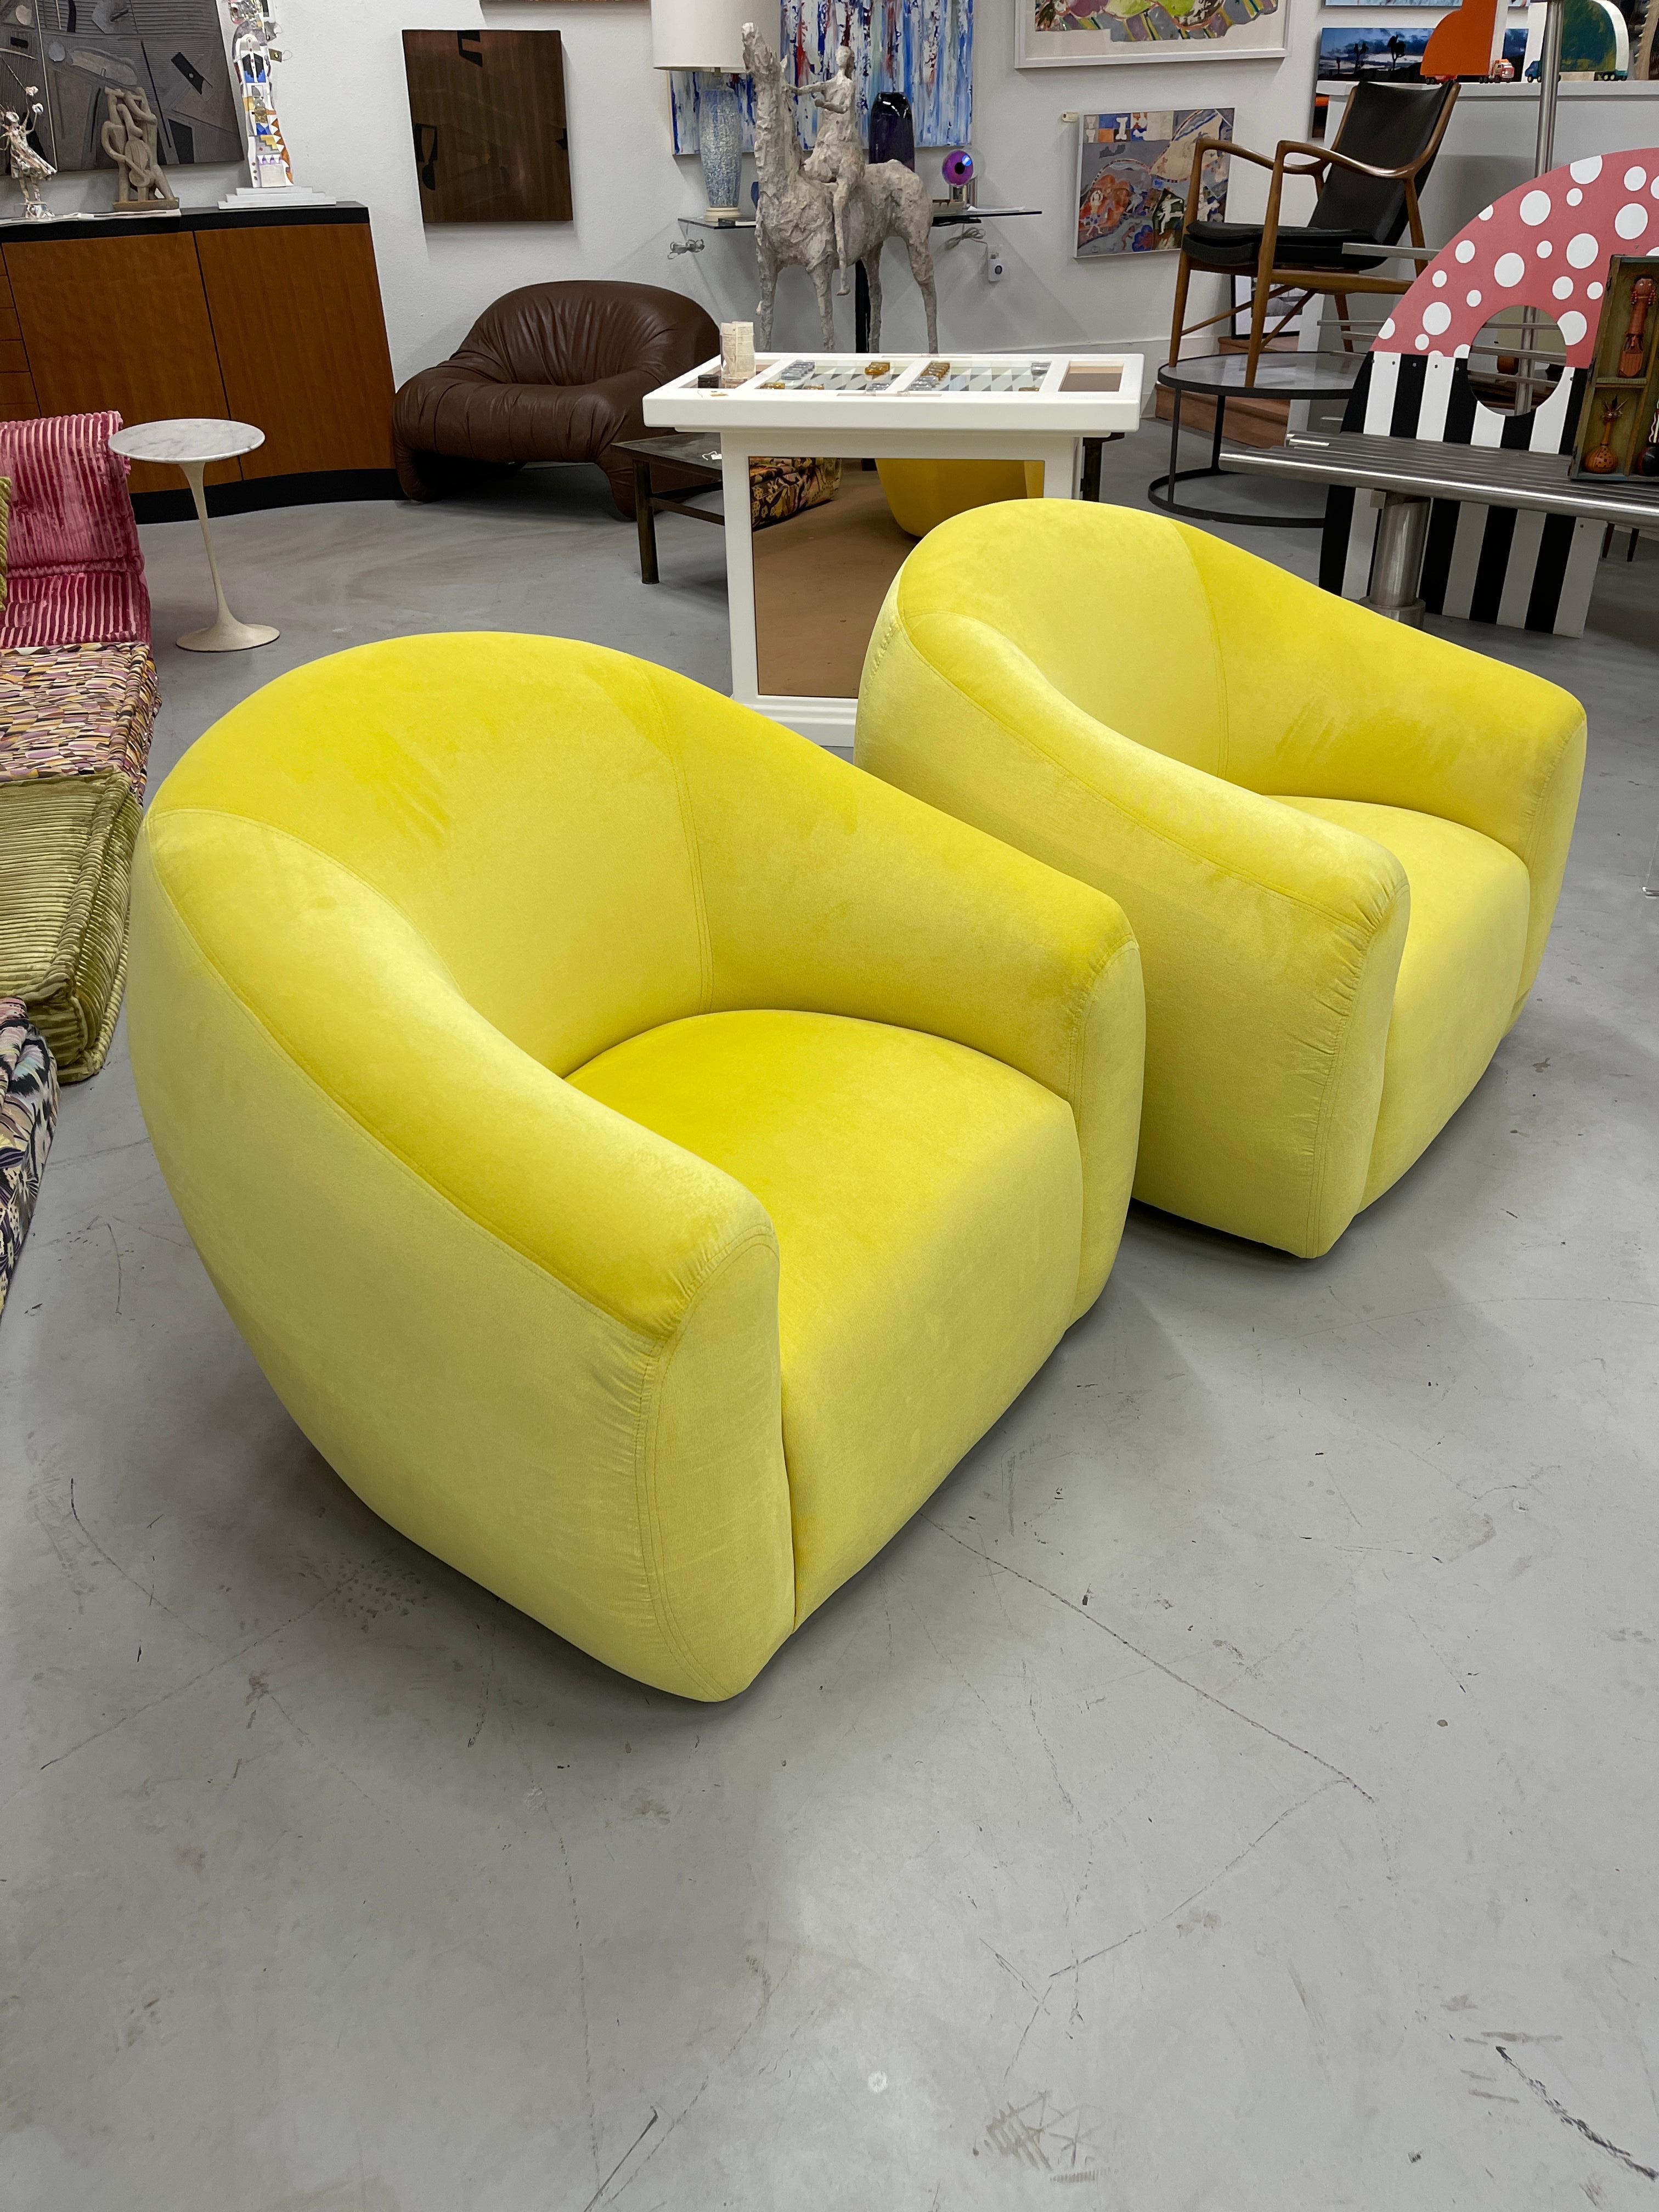 A Rudin Swivel Chairs in Limon Kravet Fabric 11